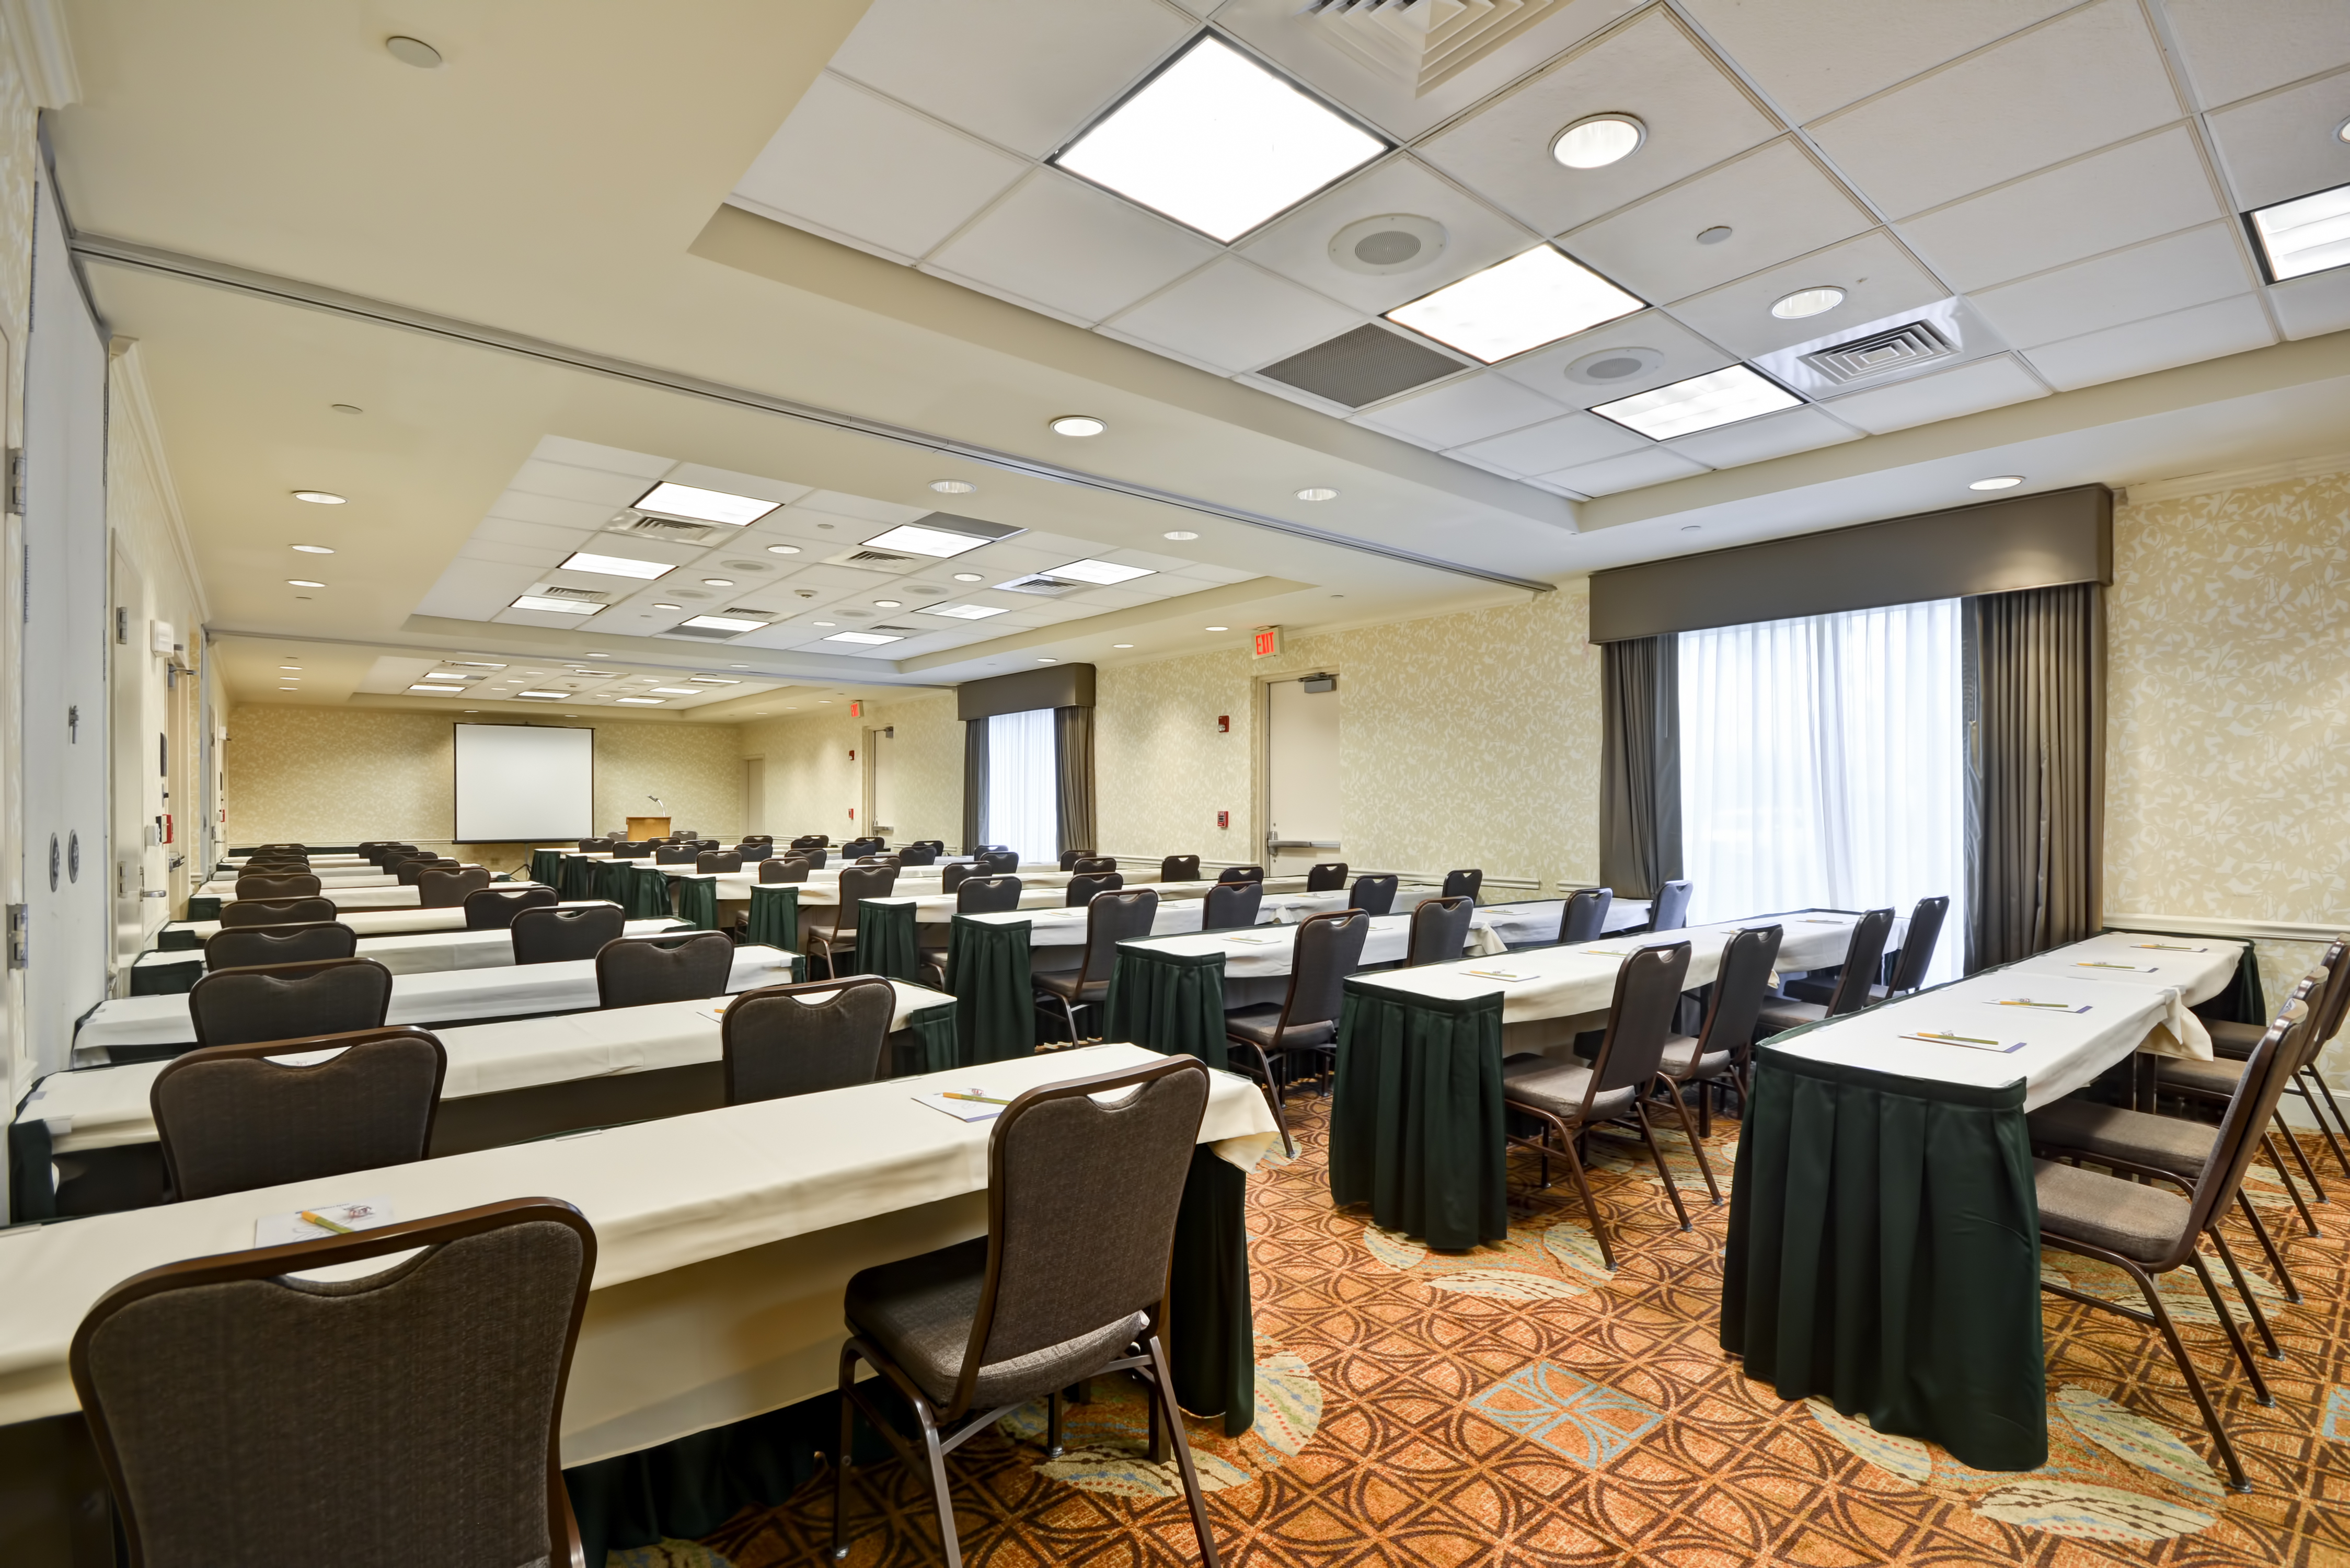 Classroom Setup in Meeting Room With Tables and Chairs Facing Presentation Screen and Podium